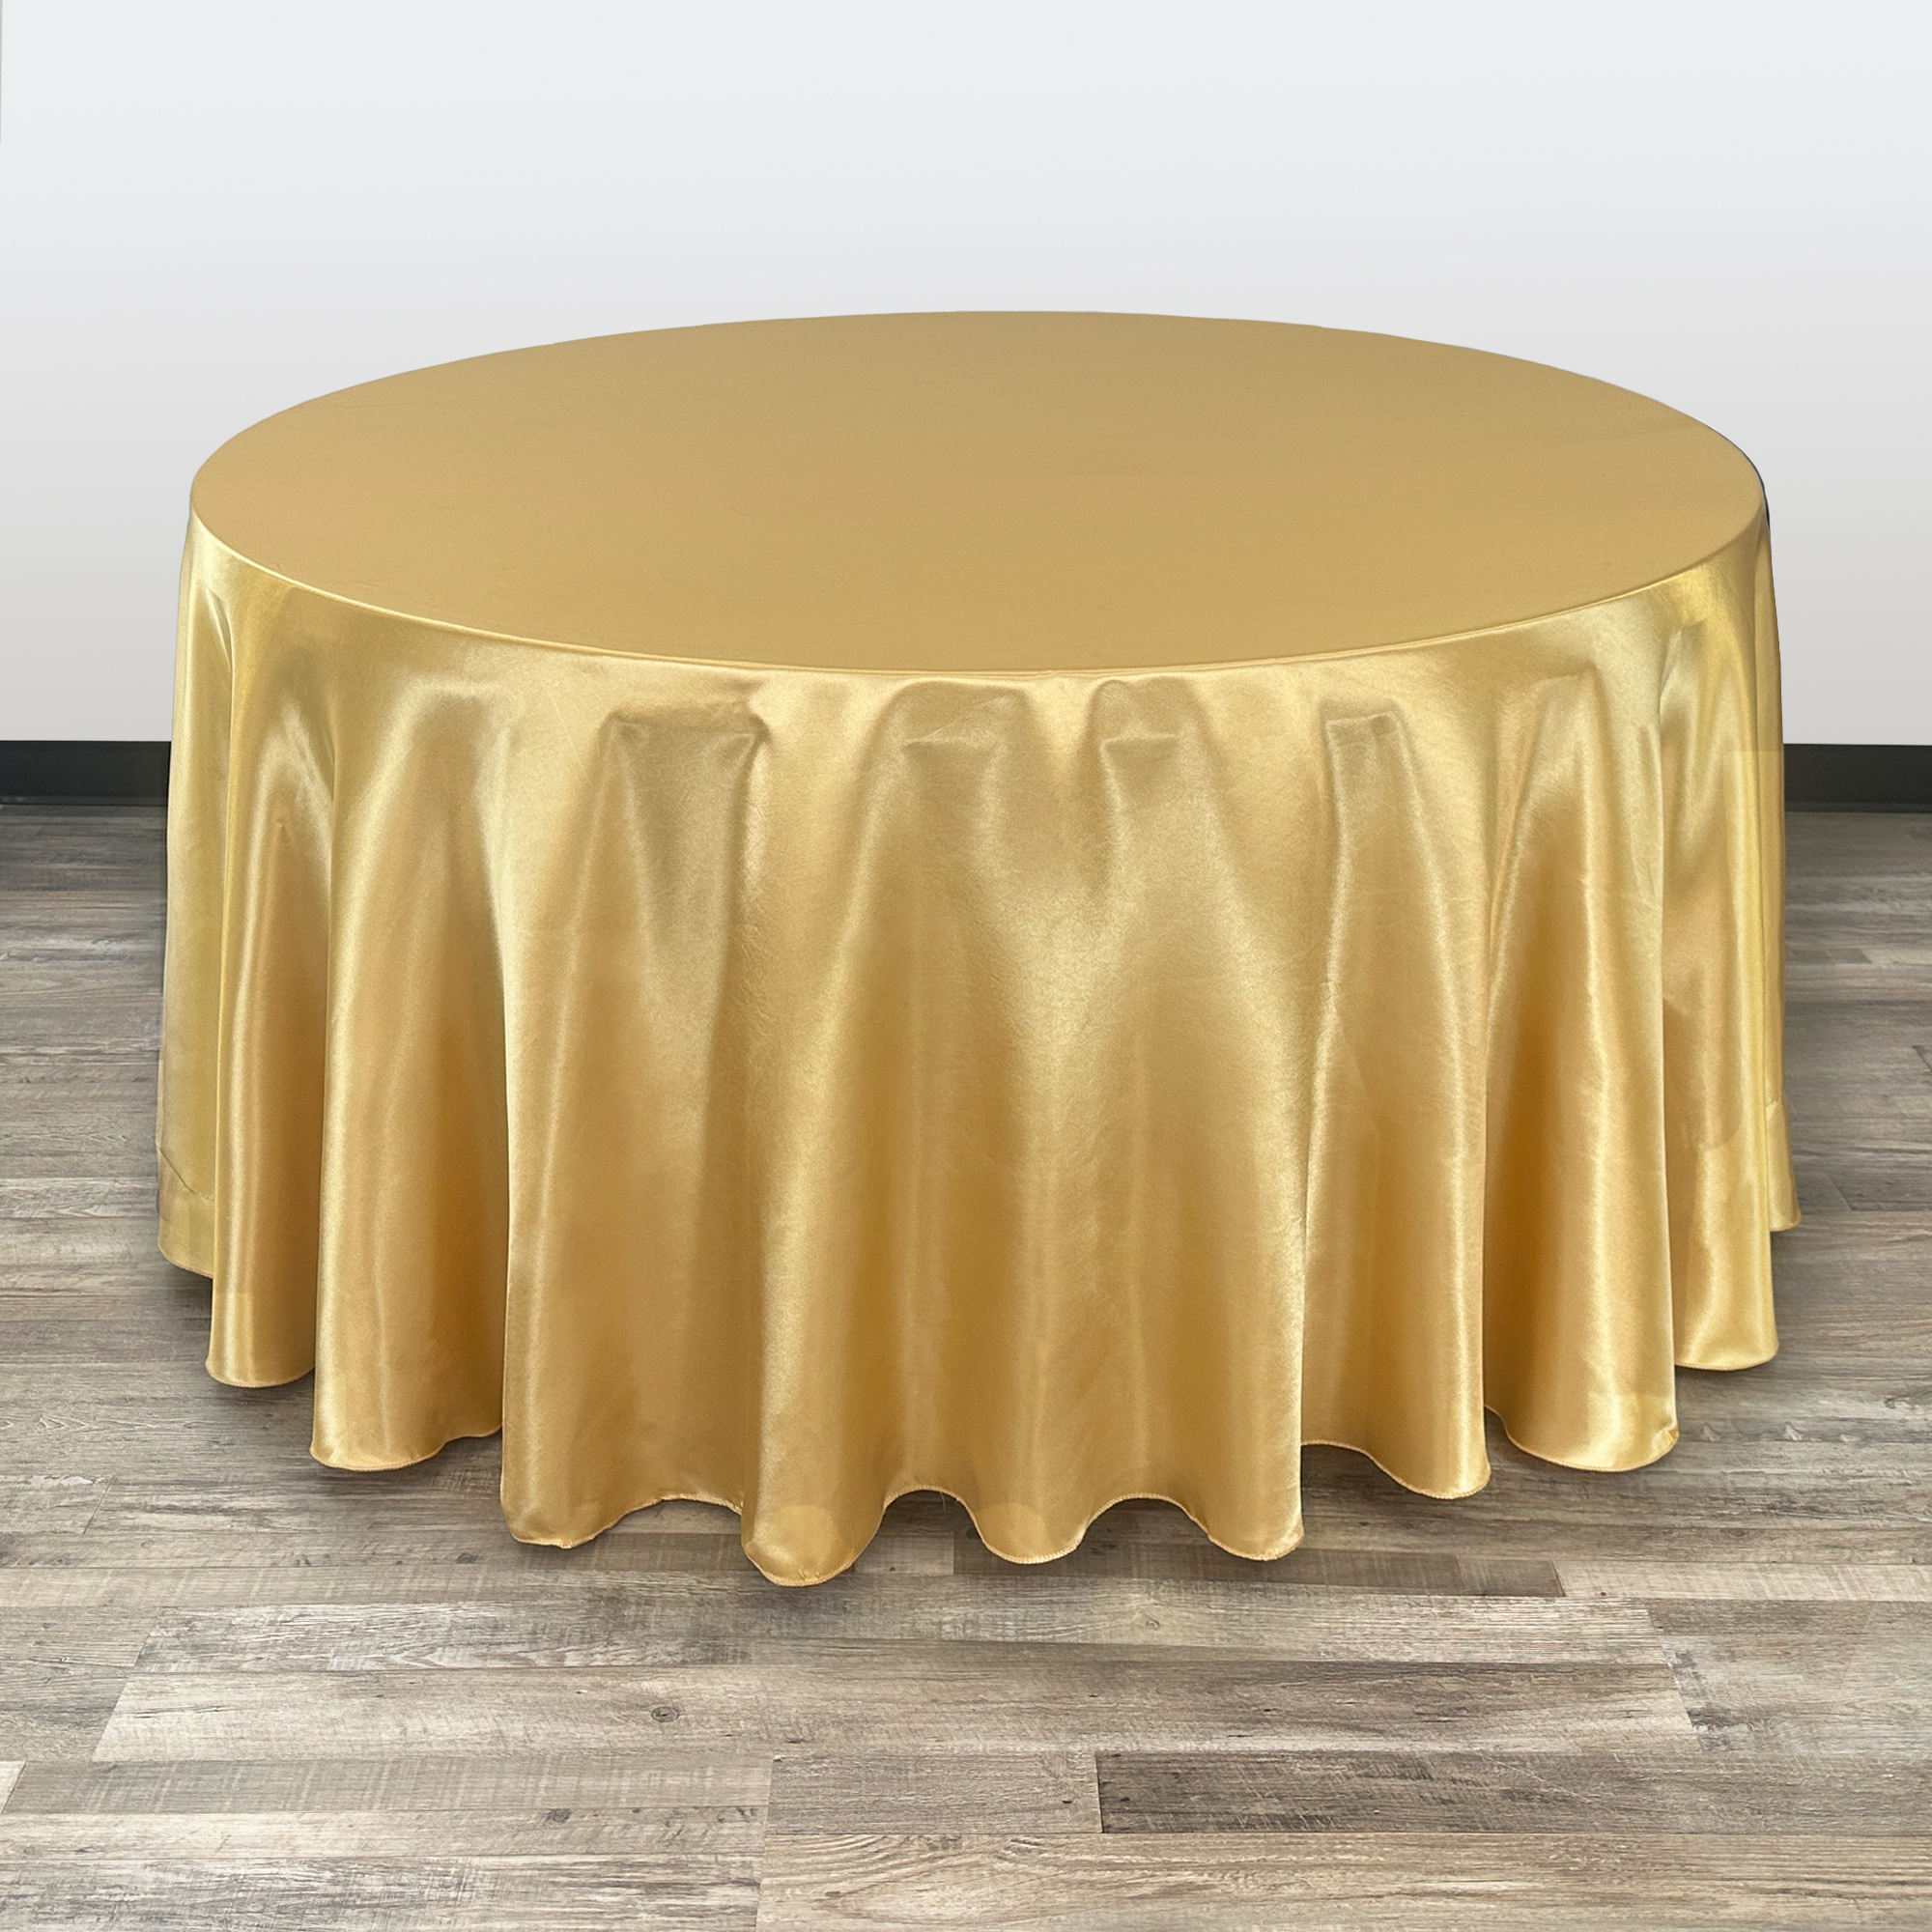 https://cdn11.bigcommerce.com/s-bch7e9/images/stencil/original/products/413/18026/120-inch-round-satin-tablecloth-gold-2__95227.1702924741.jpg?c=2